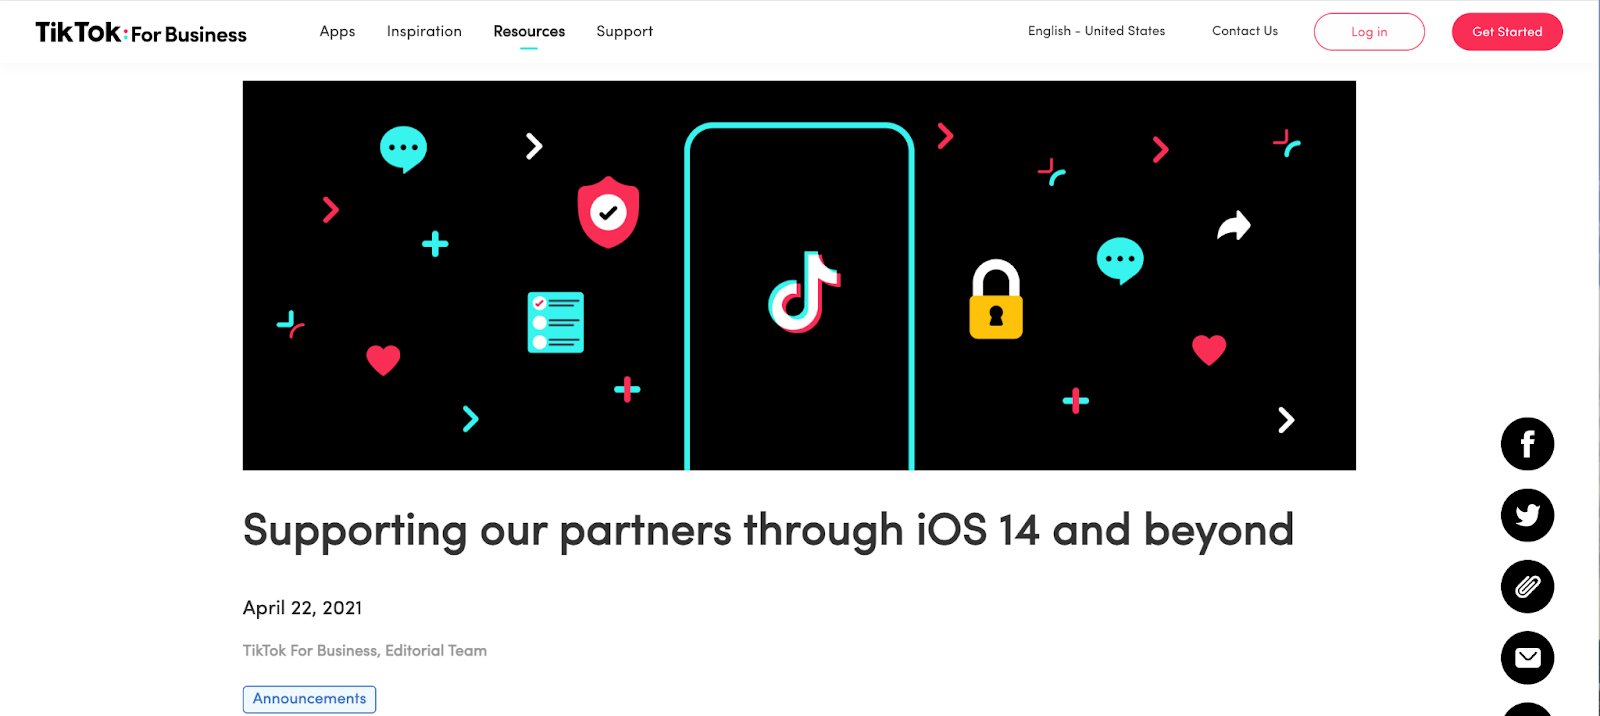 TikTok promises to support their partners as things are changing